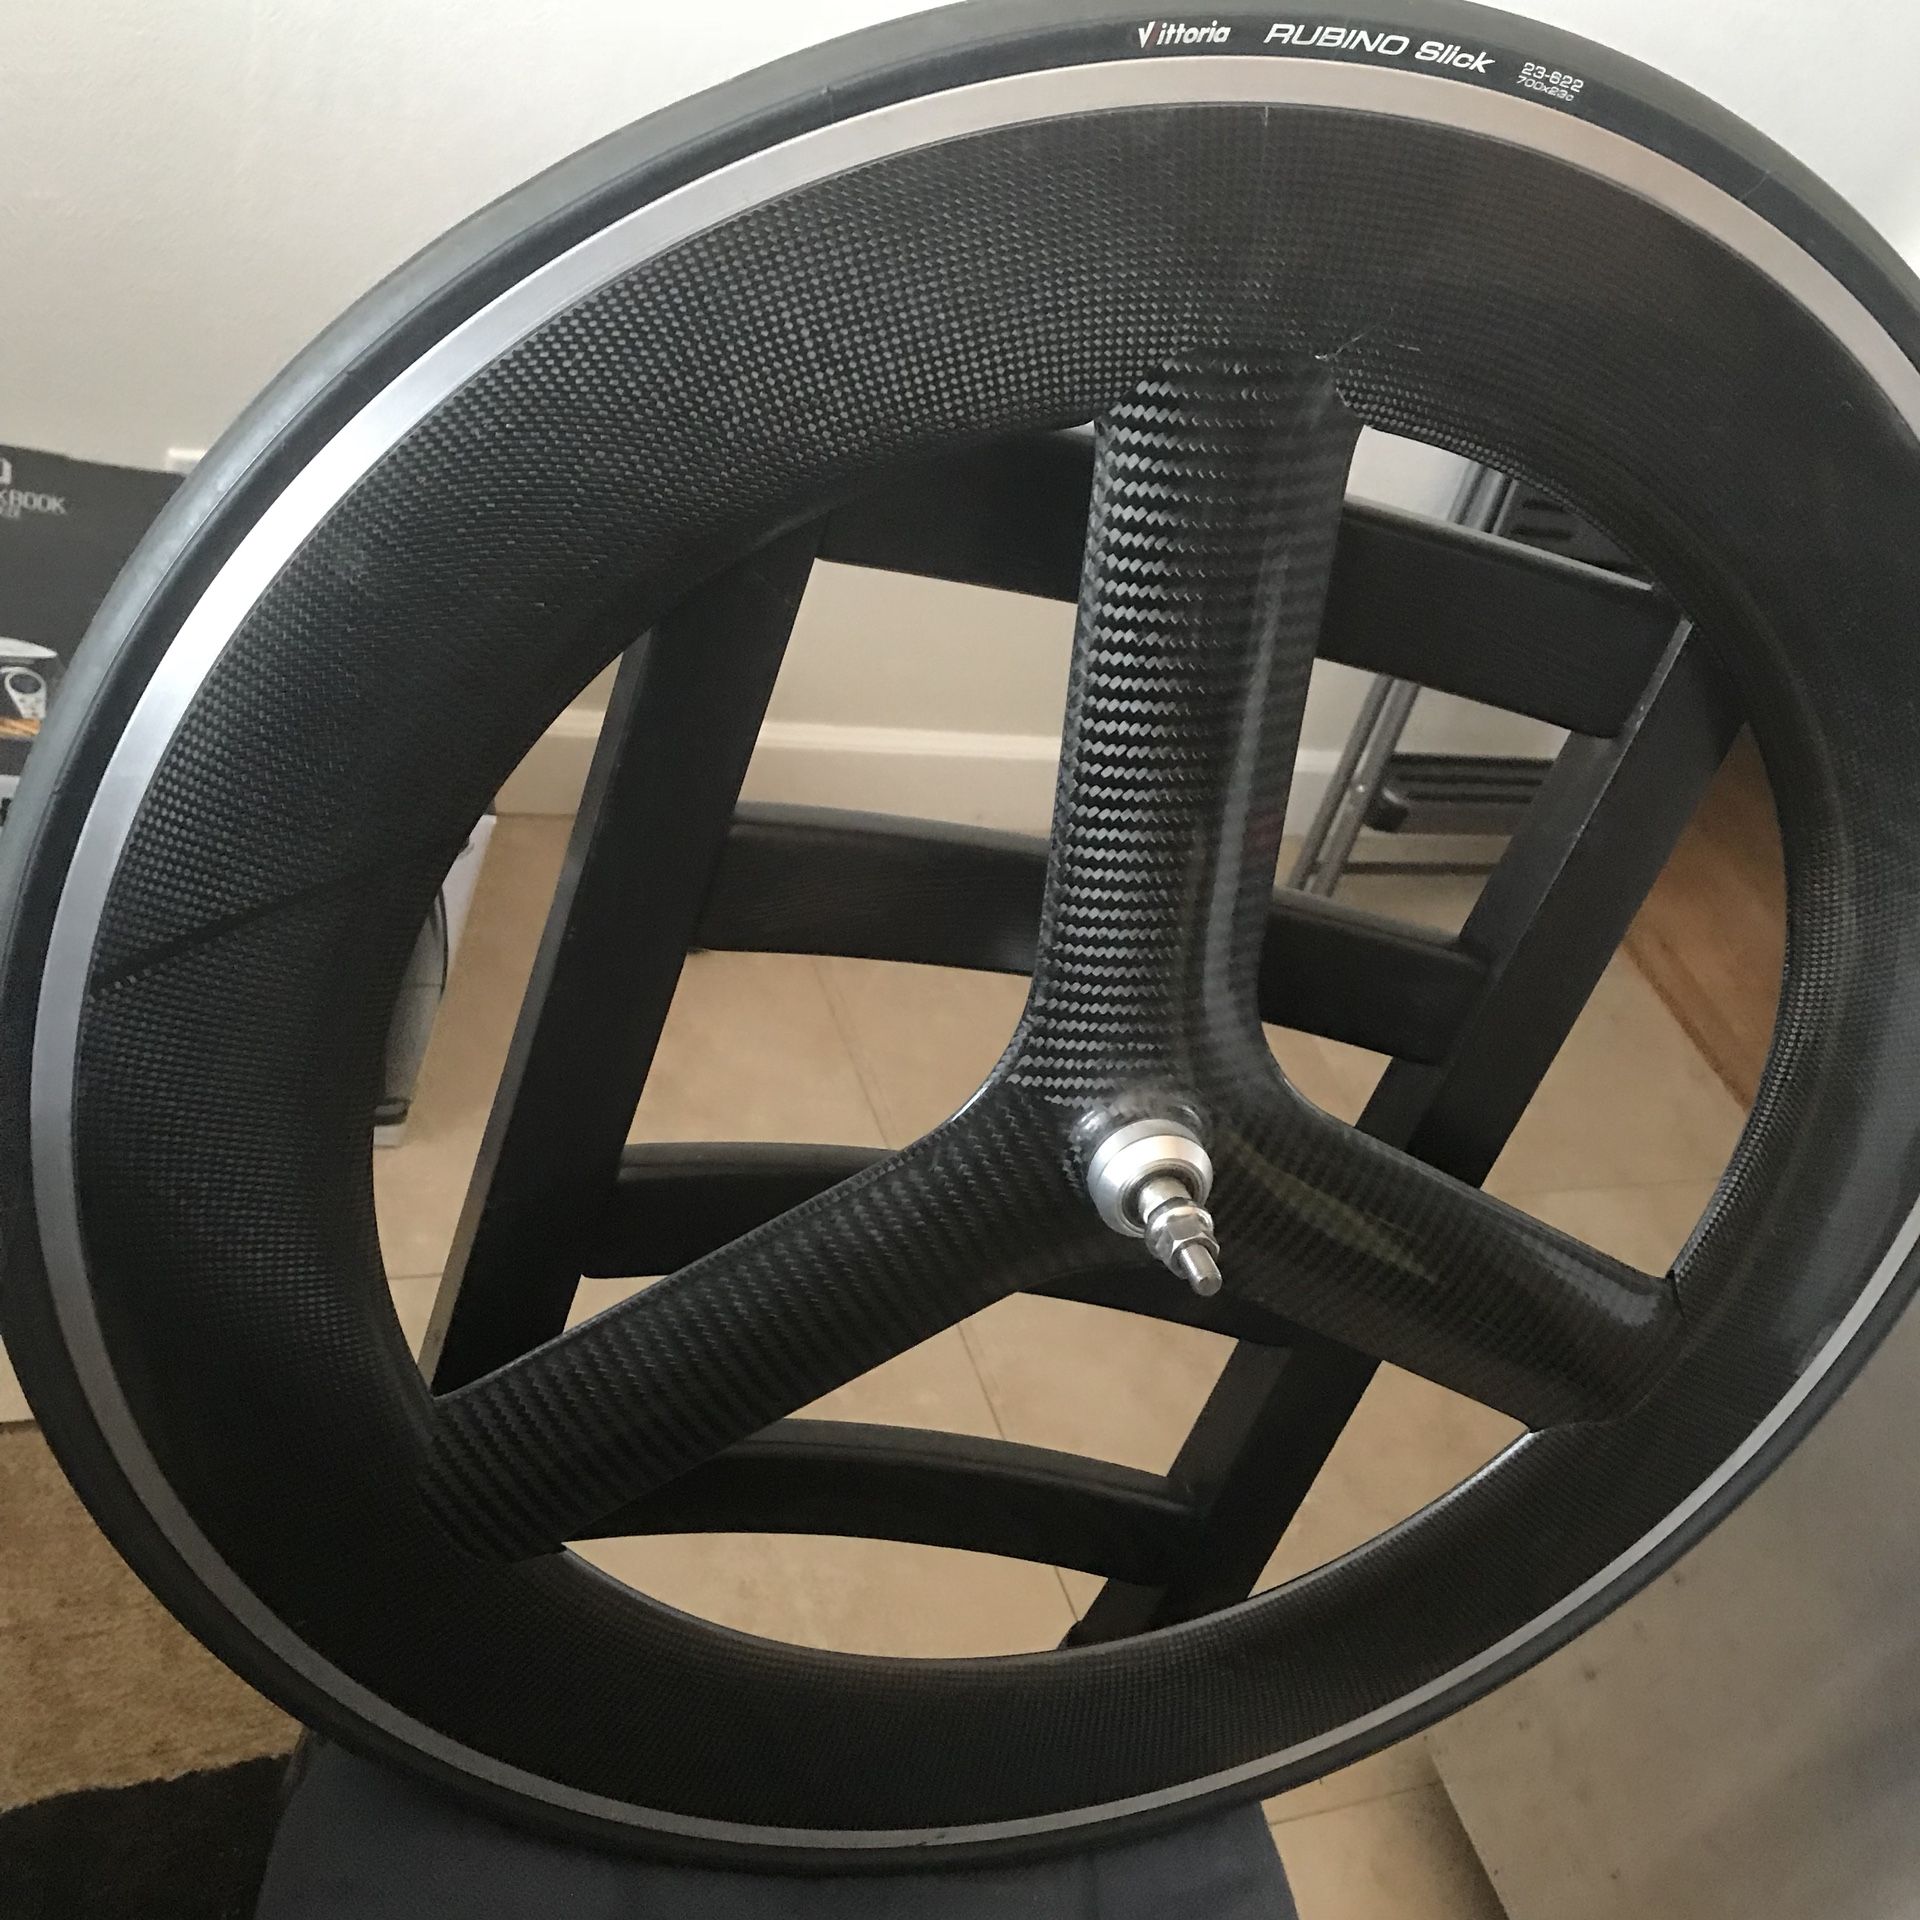 HED H3D 700c Clincher